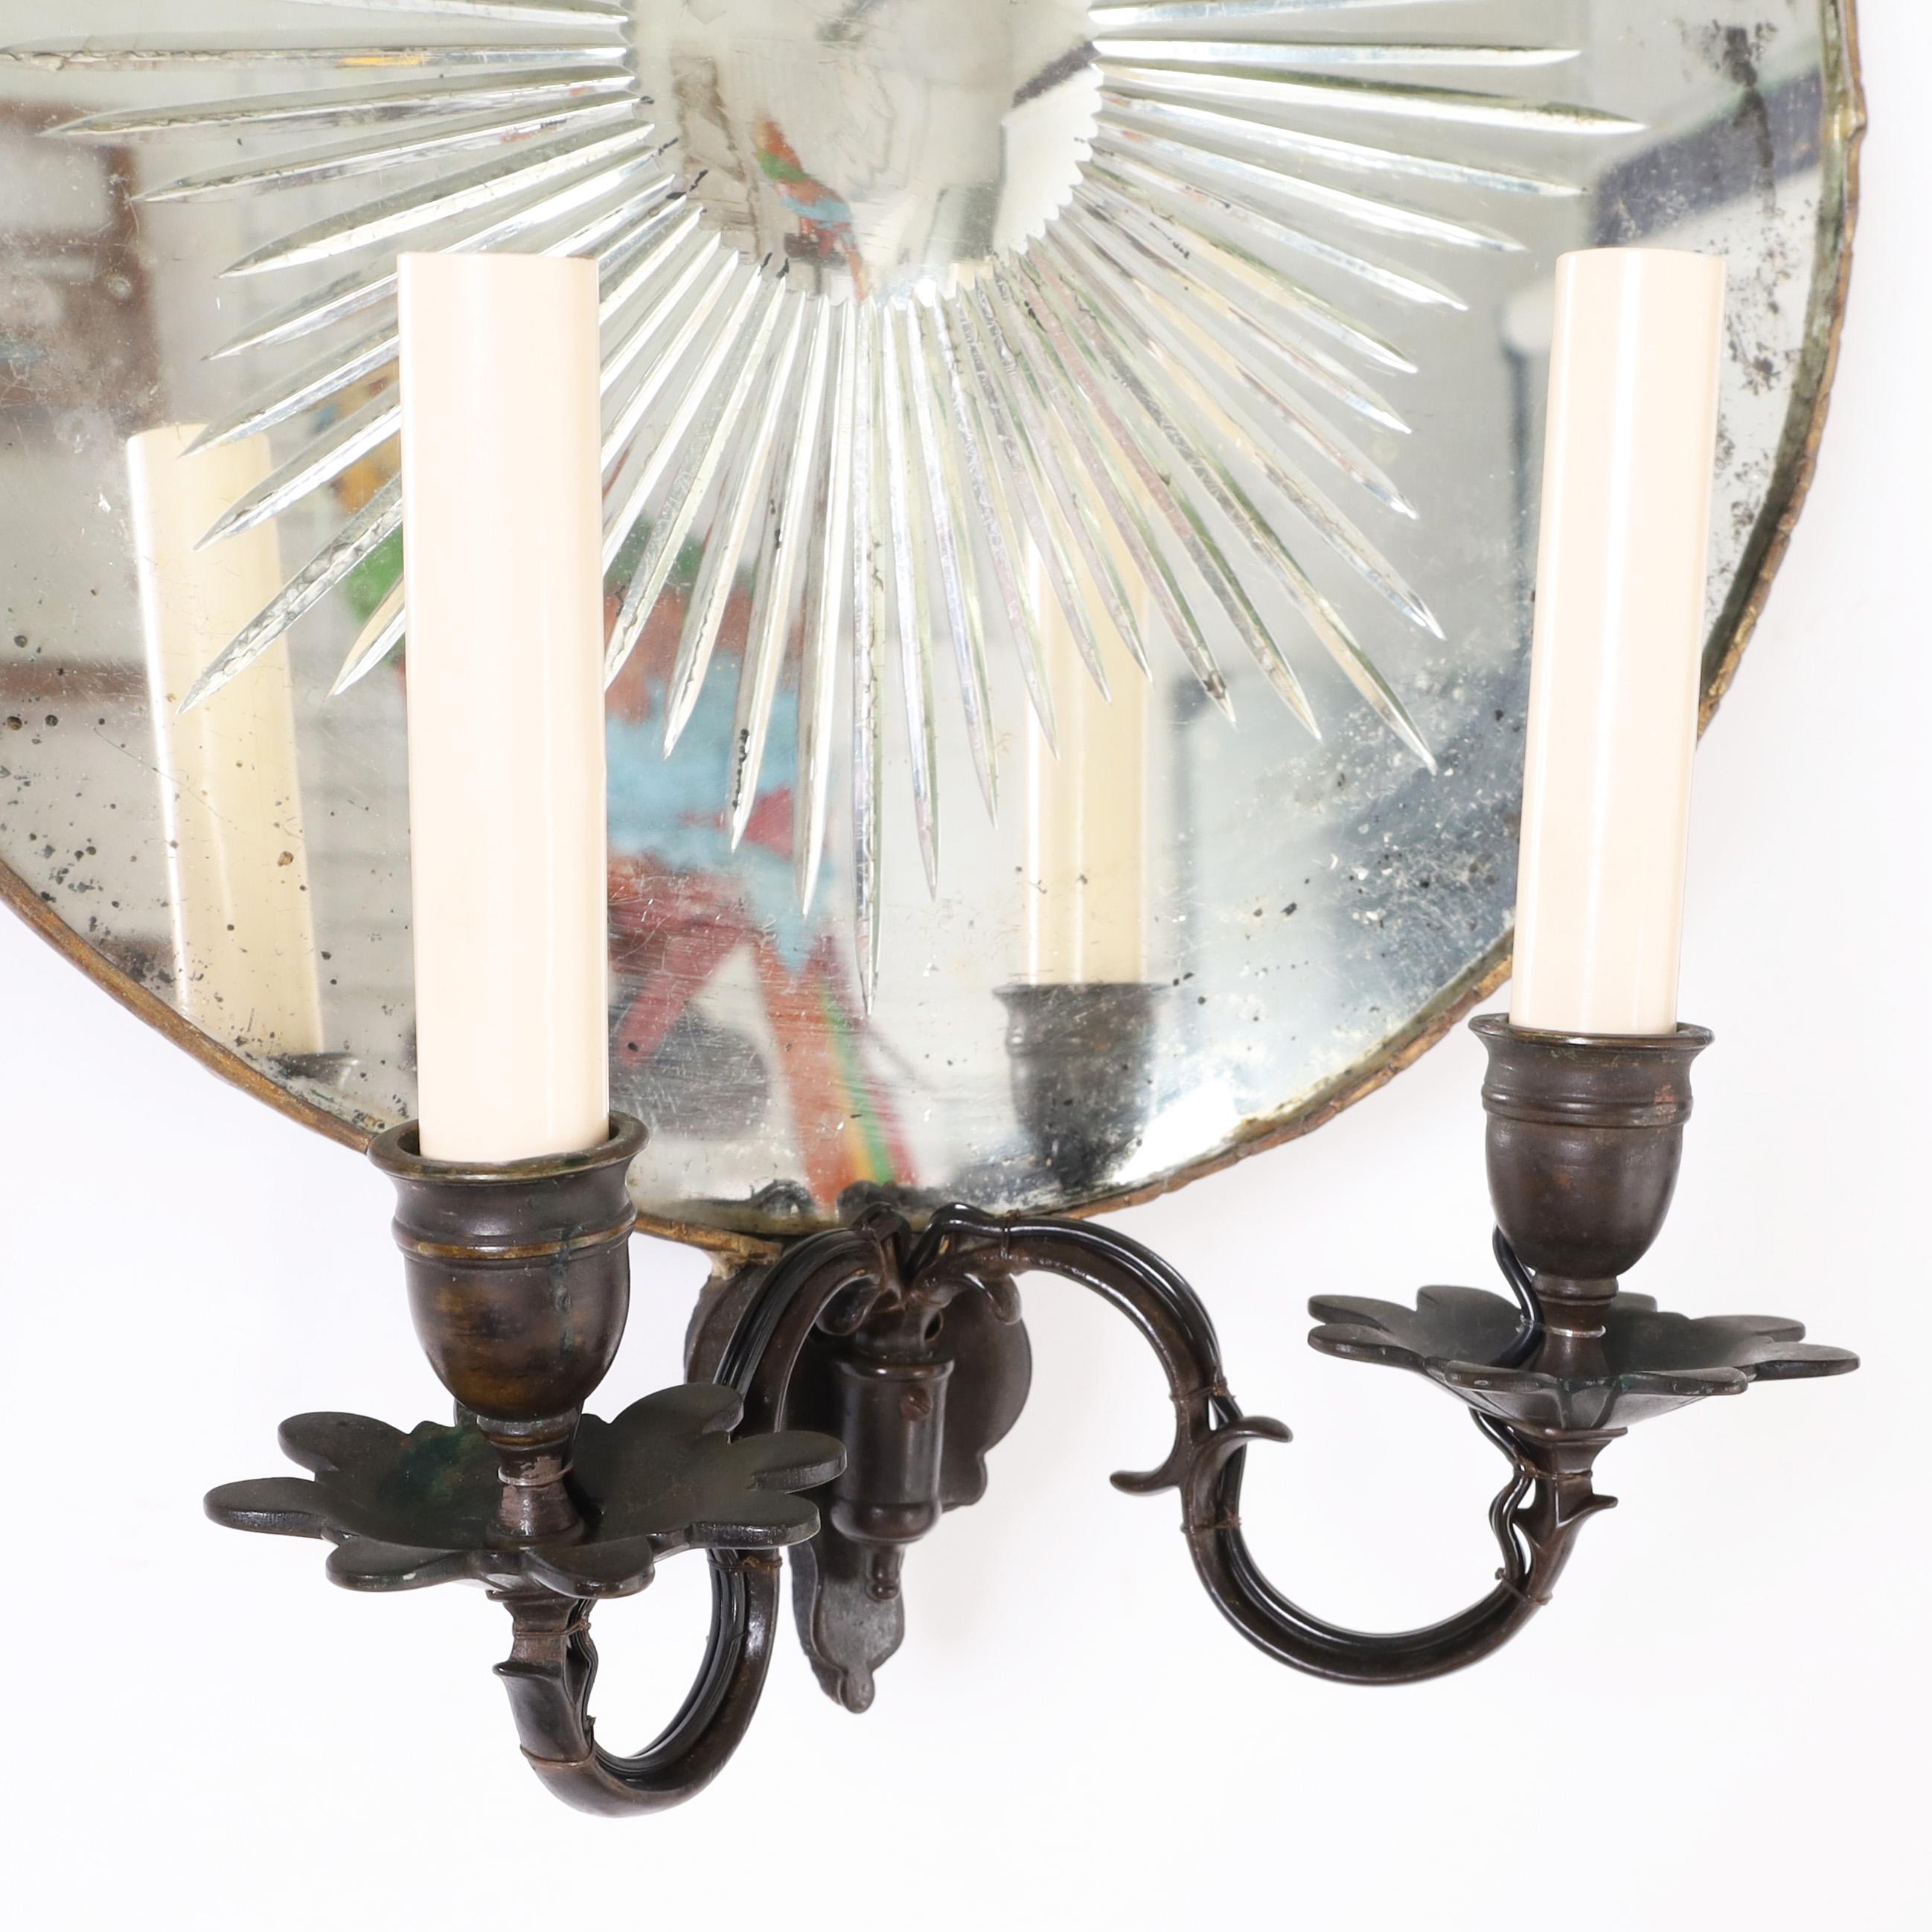 Pair of Antique English Mirrored Wall Sconces 2